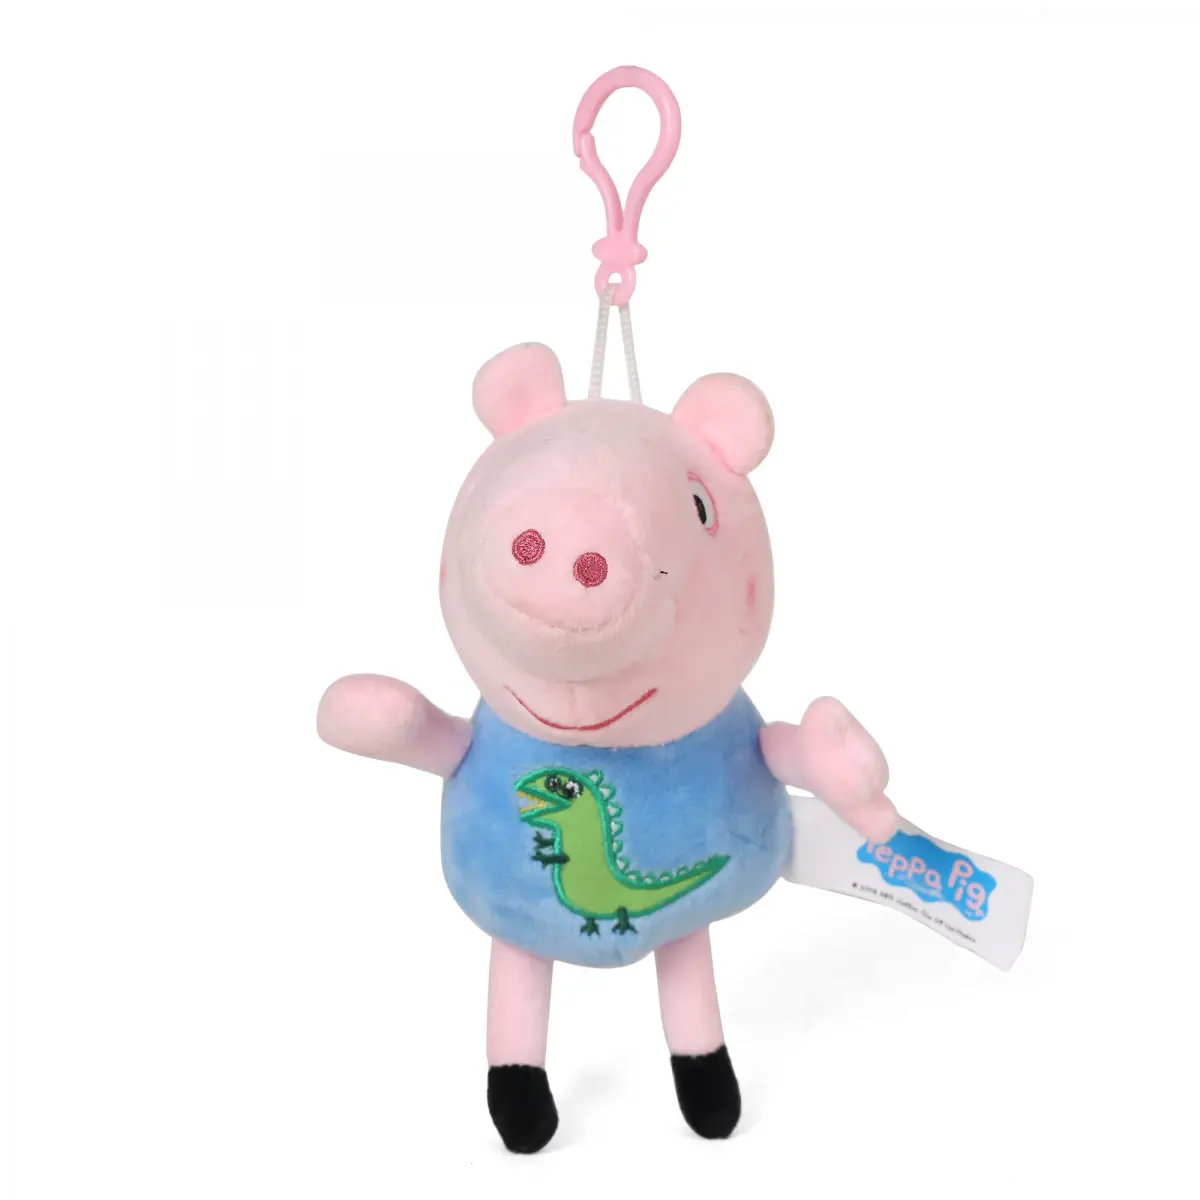 Peppa Pig Cute George Soft Toy for Kids, 30cm, 18M+, Multicolour